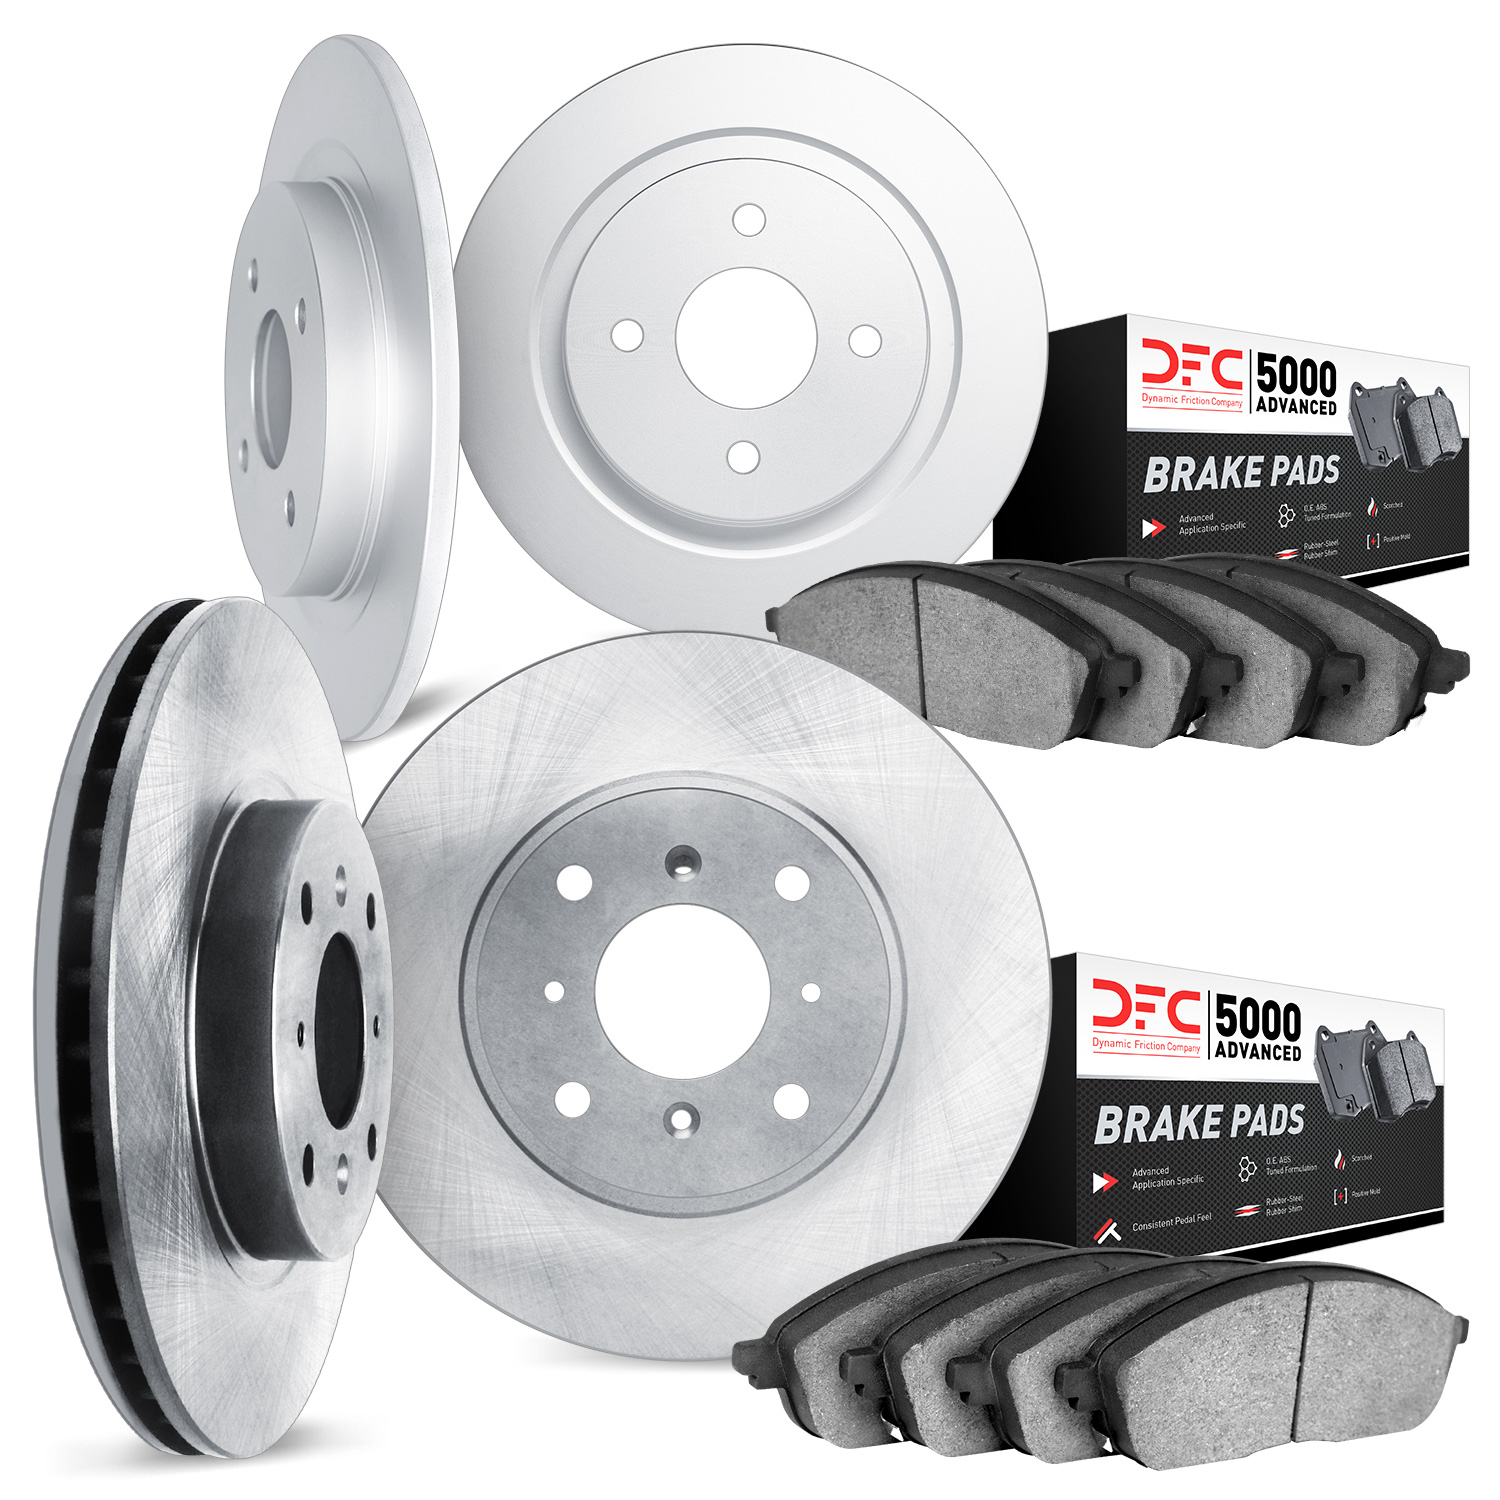 6504-53030 Brake Rotors w/5000 Advanced Brake Pads Kit, 1991-1996 GM, Position: Front and Rear